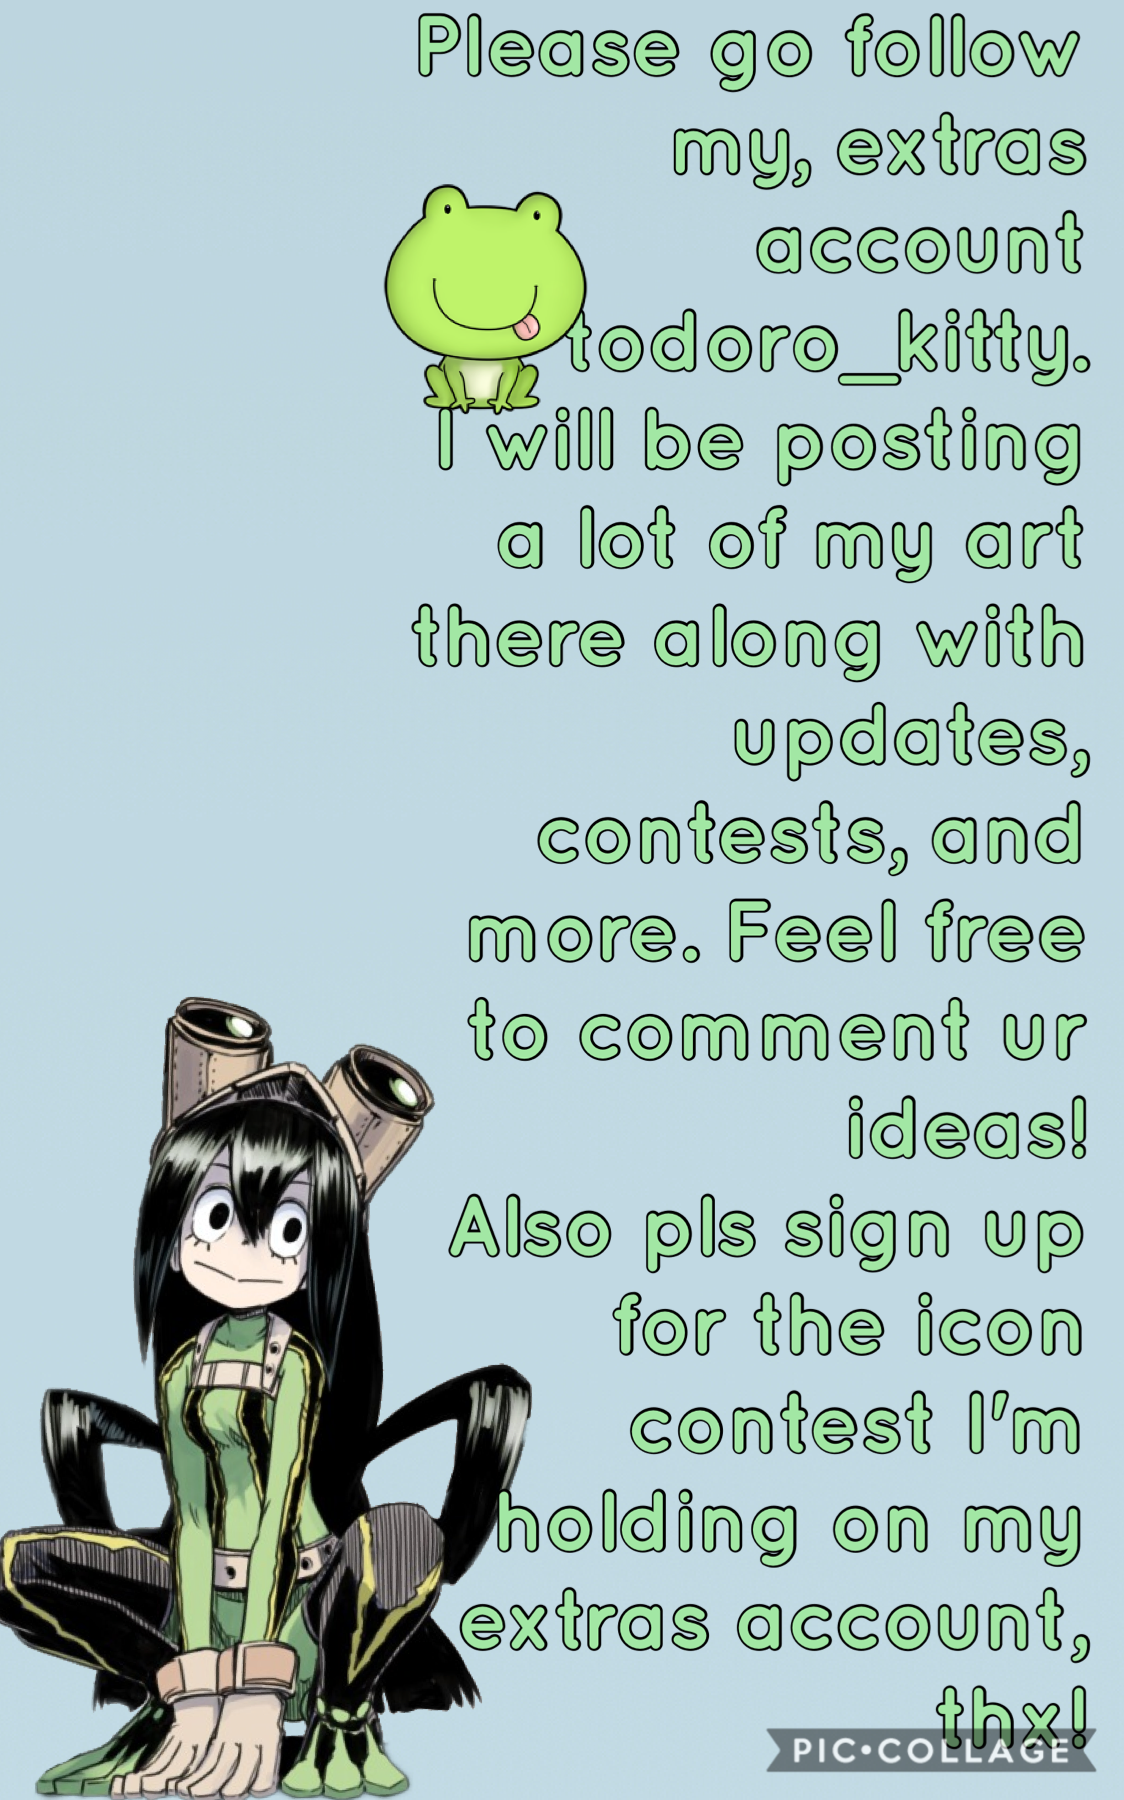 Tap
Pls enter my contest on my extras account
todoro_kittu